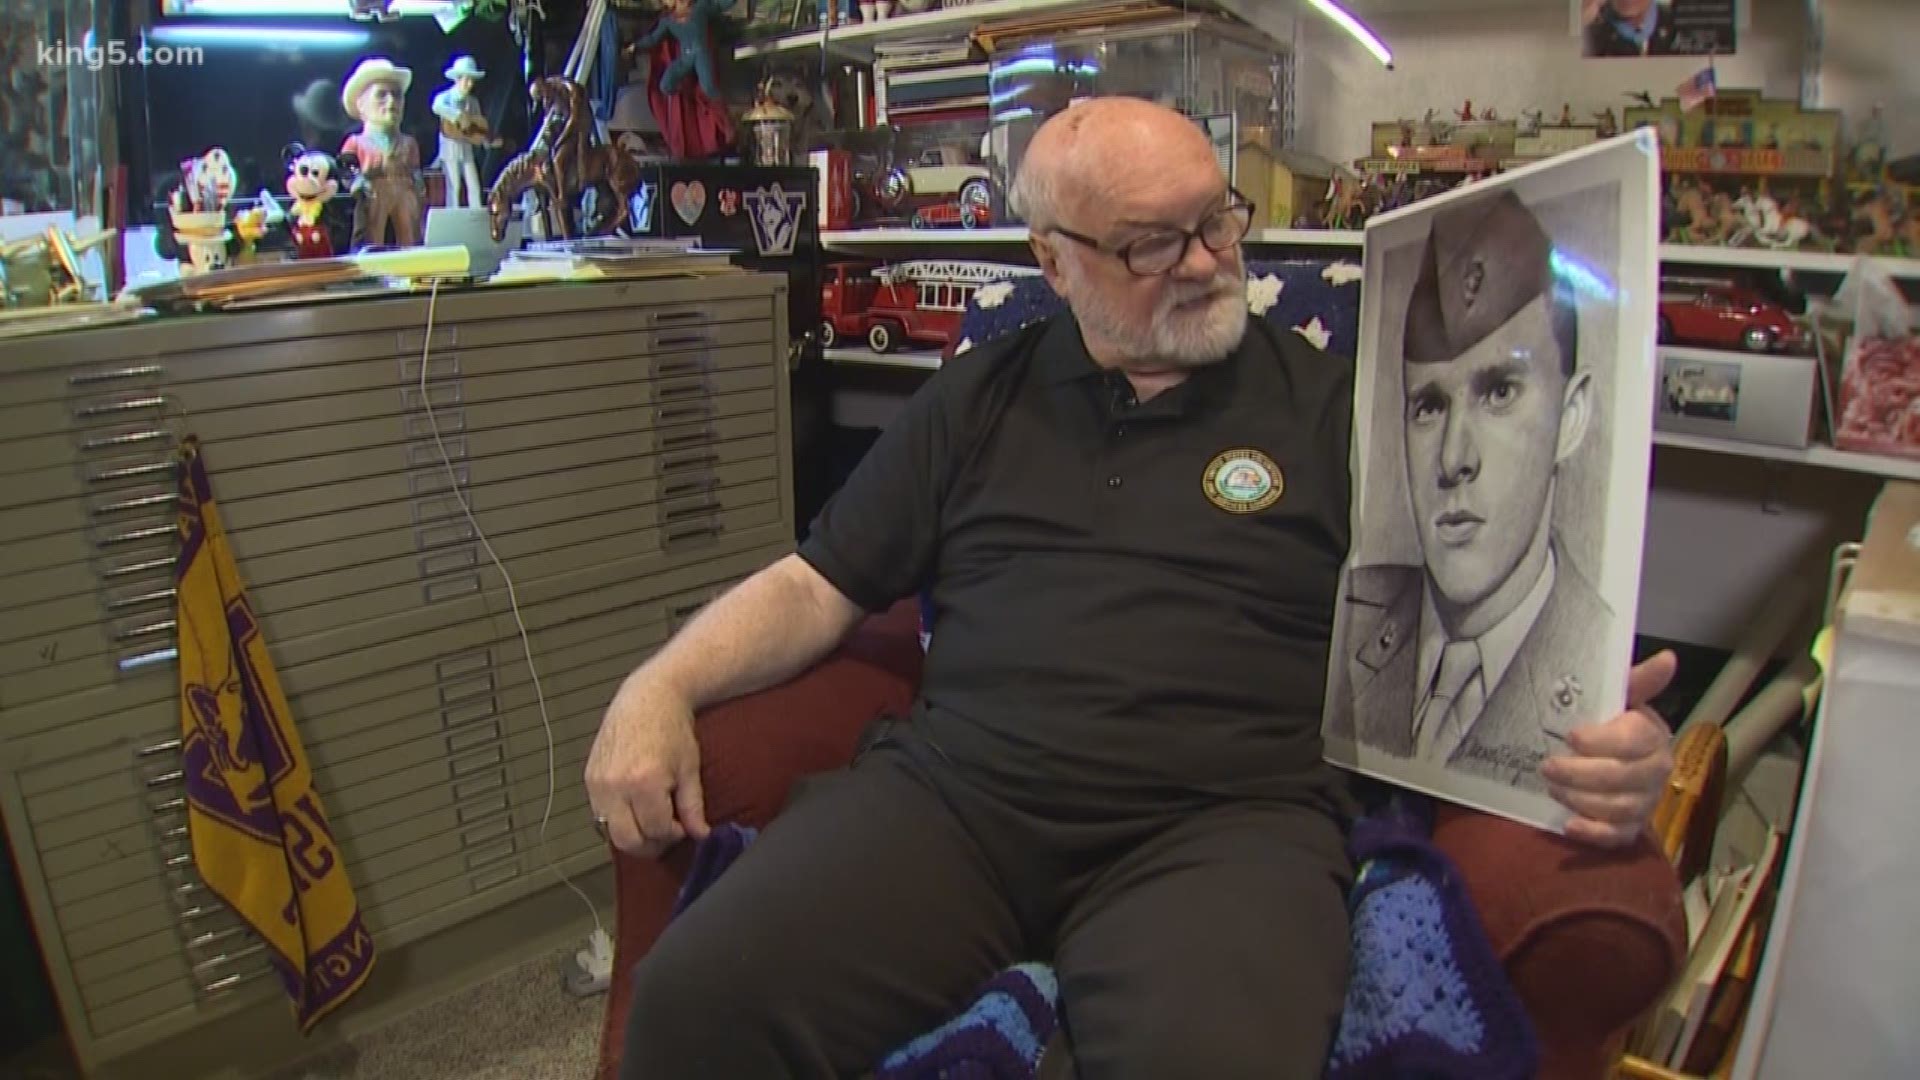 Vietnam veteran Mike Reagan honors fallen heroes through his art.    So far, he has delivered more than 6,000 portraits to the families of fallen service members for free.